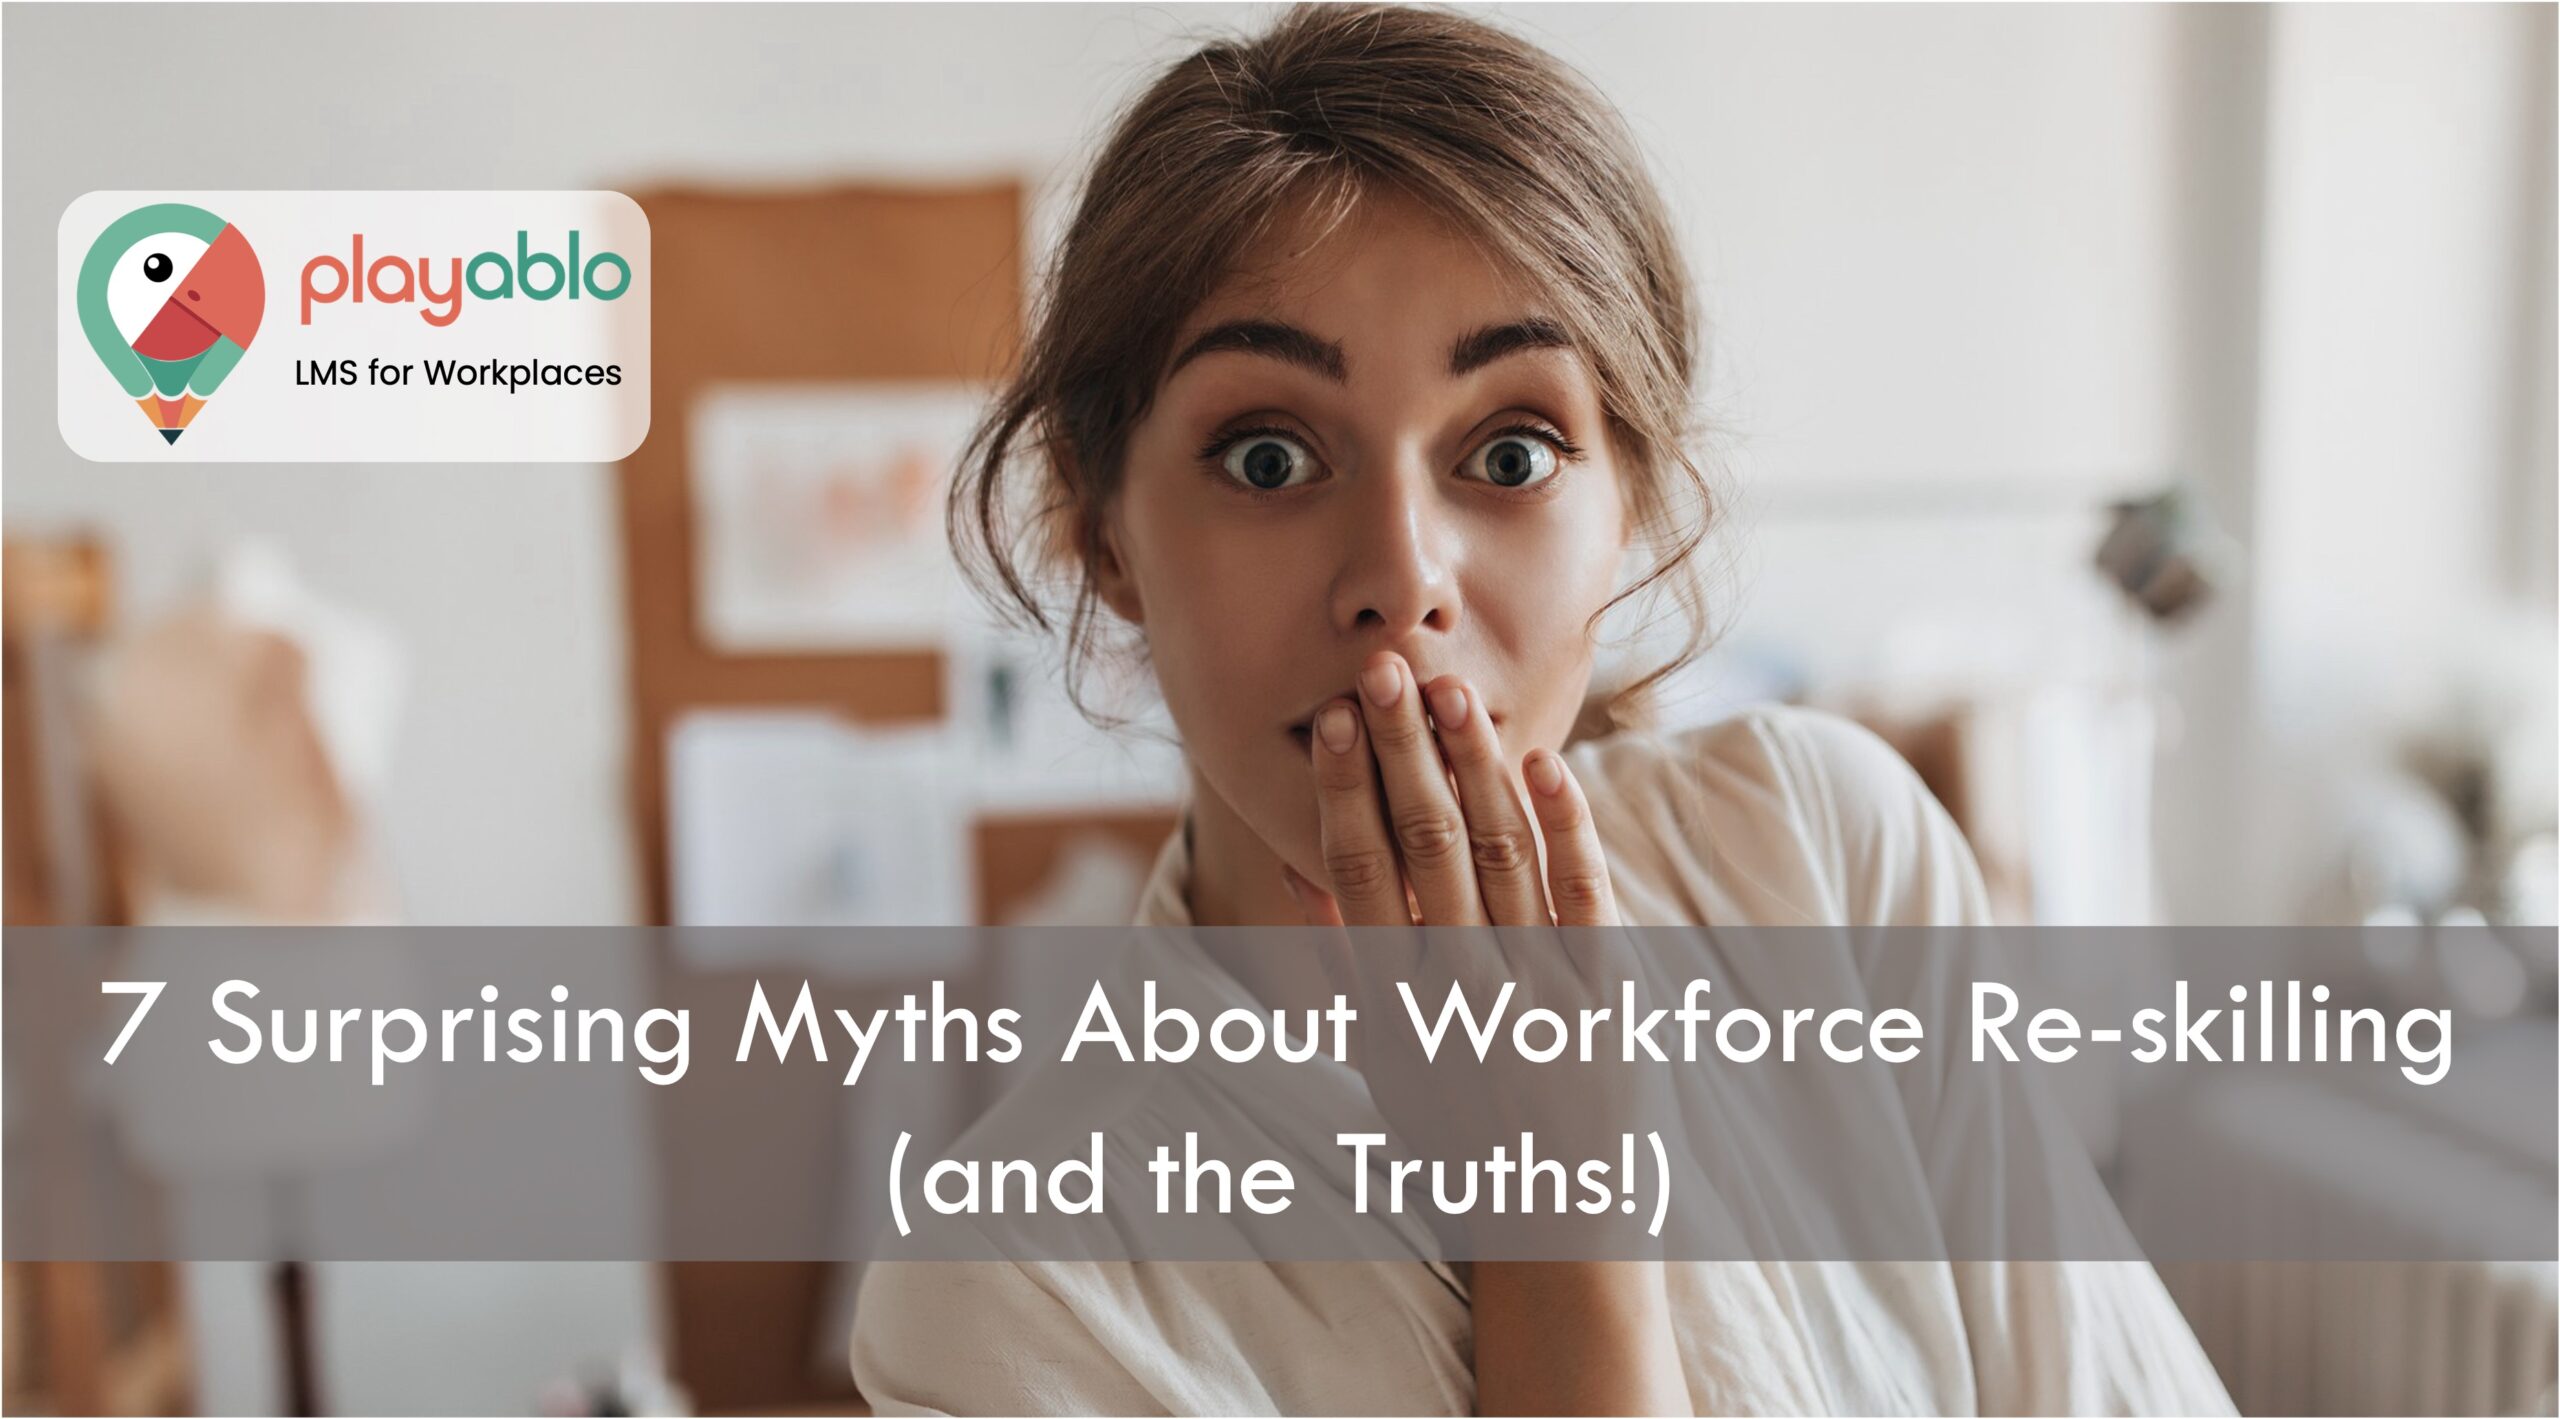 Myths About Workforce Re-skilling